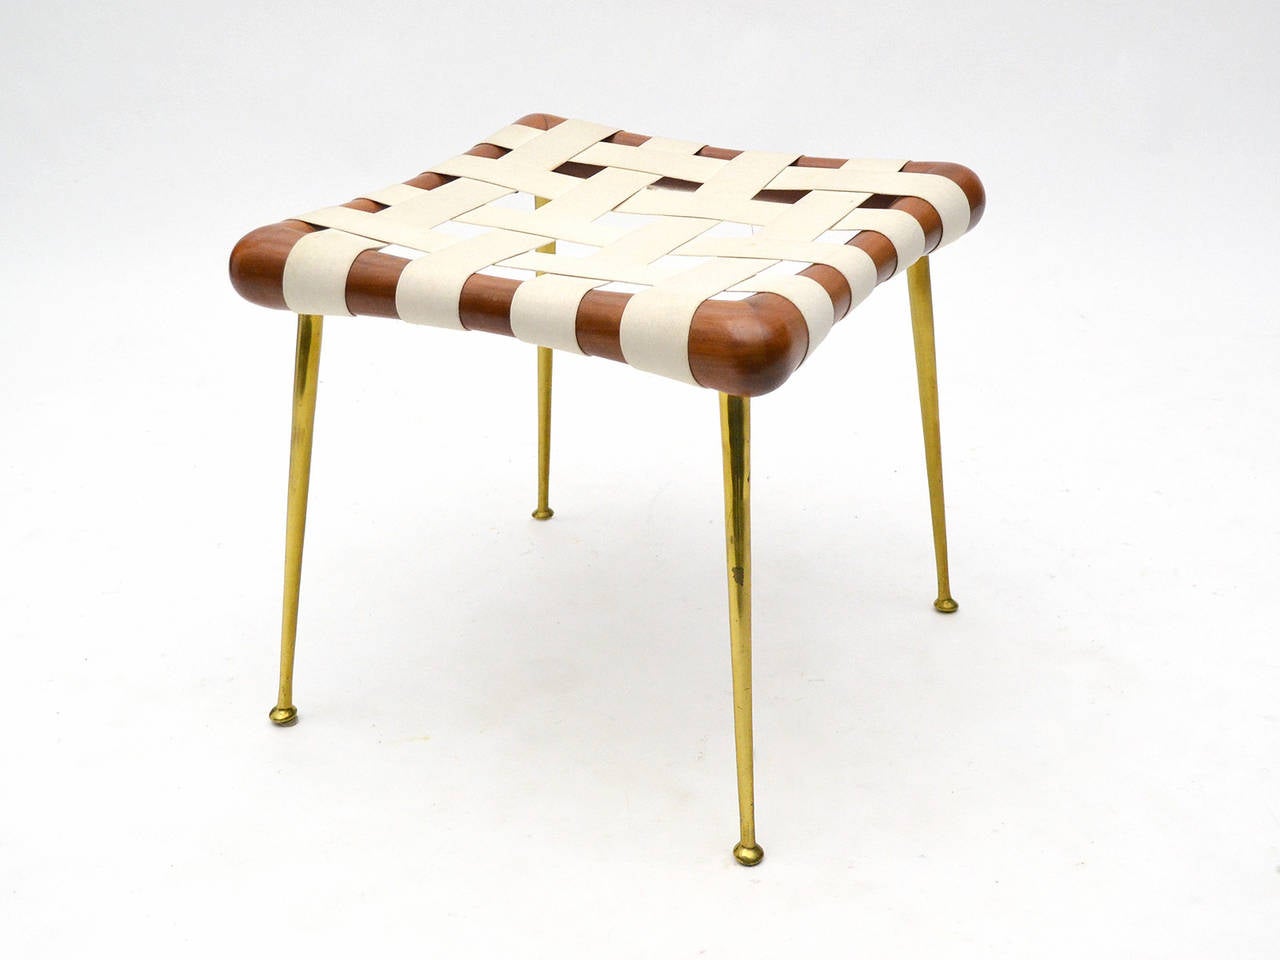 An exceptional design by Robsjohn-Gibbings, this stool has a seat of walnut and woven webbing supported by long tapered brass legs. Exquisitely crafted by Widdicomb, the heft of the piece belies the light, airy design.